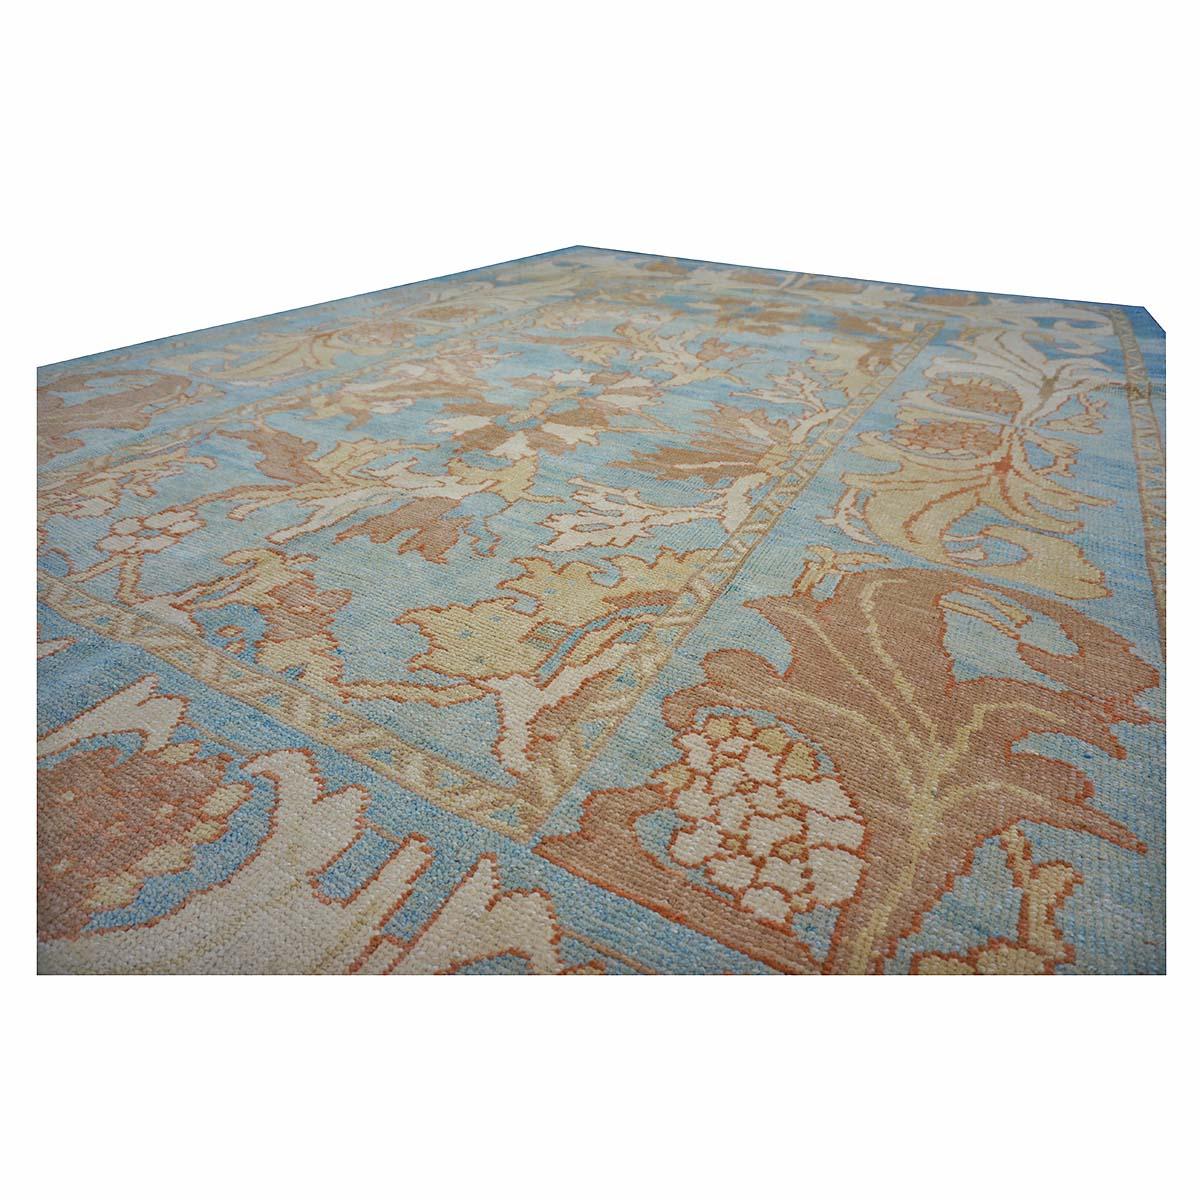 Contemporary 21st Century Turkish Donegal Oushak 8x11 Blue, Ivory, & Clay Handmade Area Rug For Sale